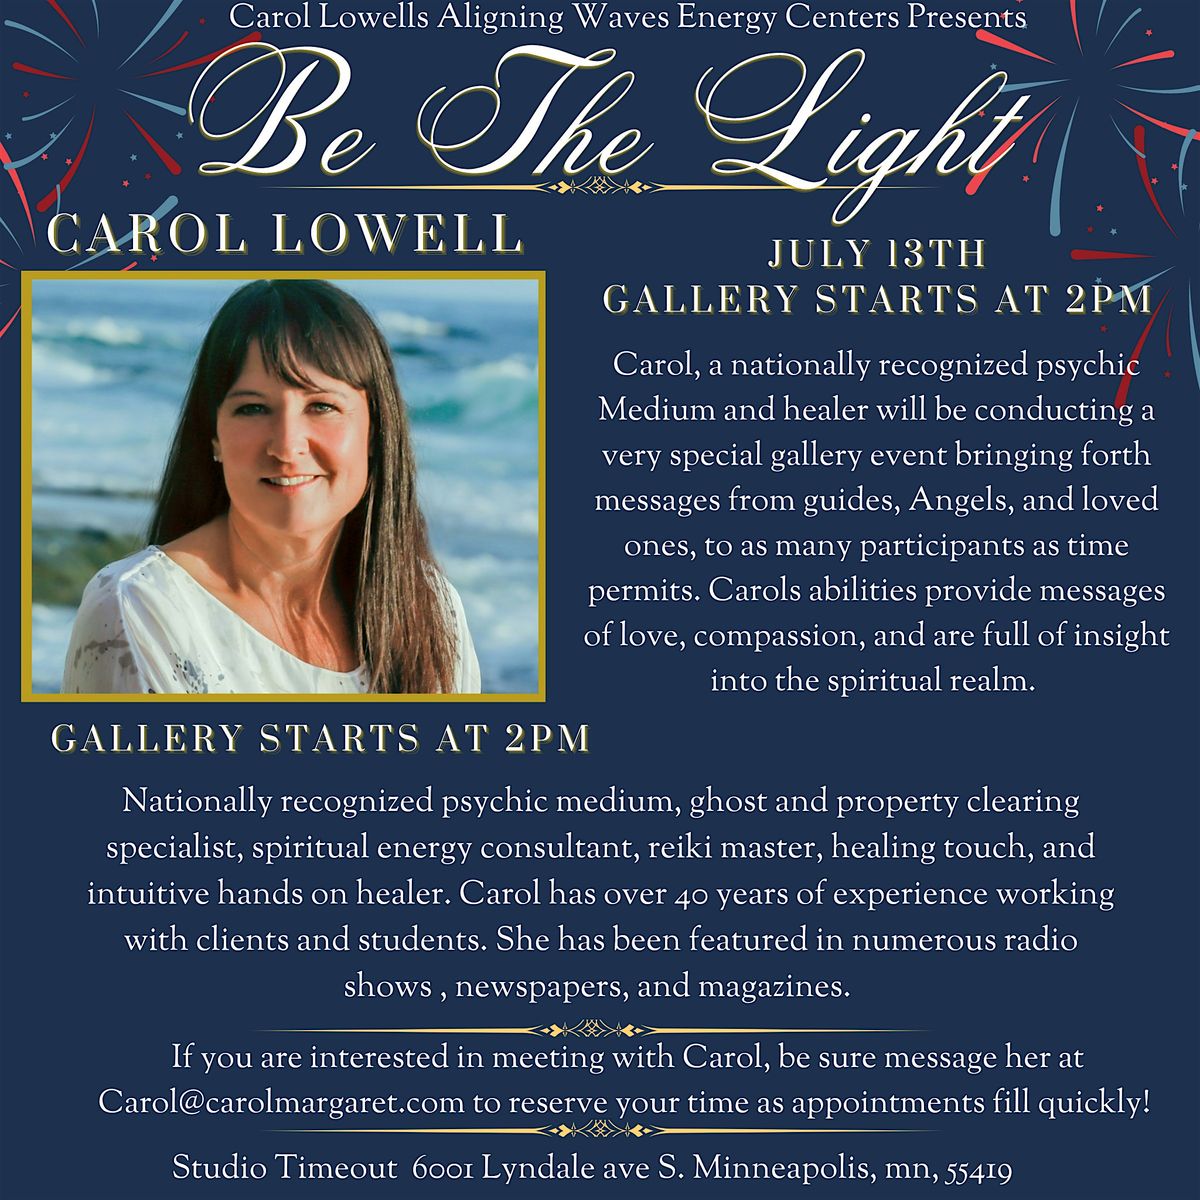 Be the Light - Carol Lowell Gallery